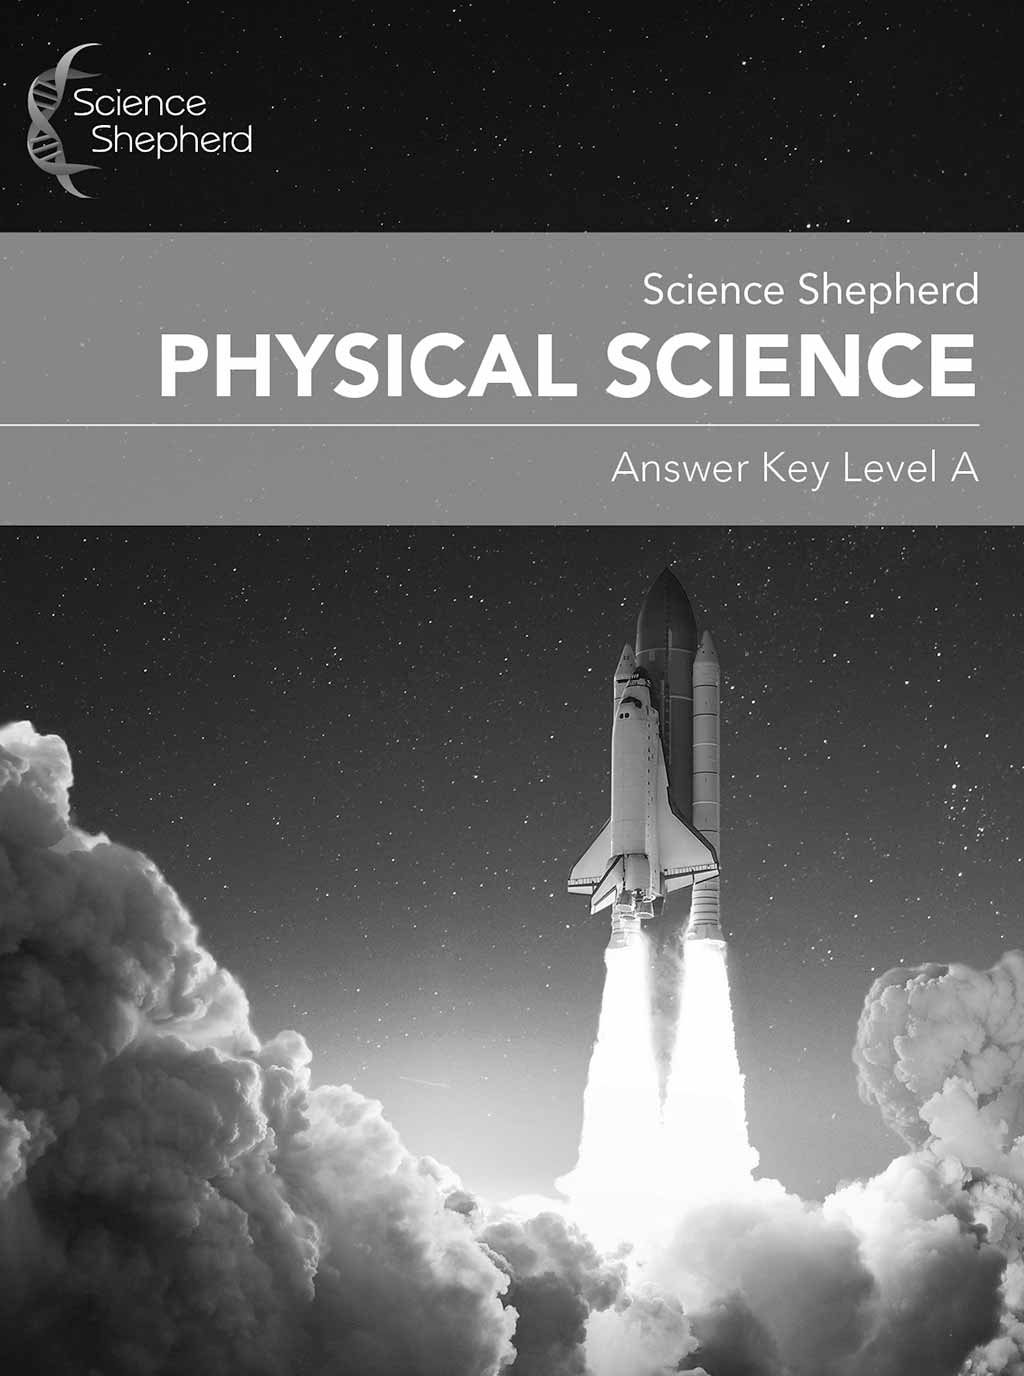 Home school Physical Science Answer Key Level A cover of a shuttle launch in grayscale